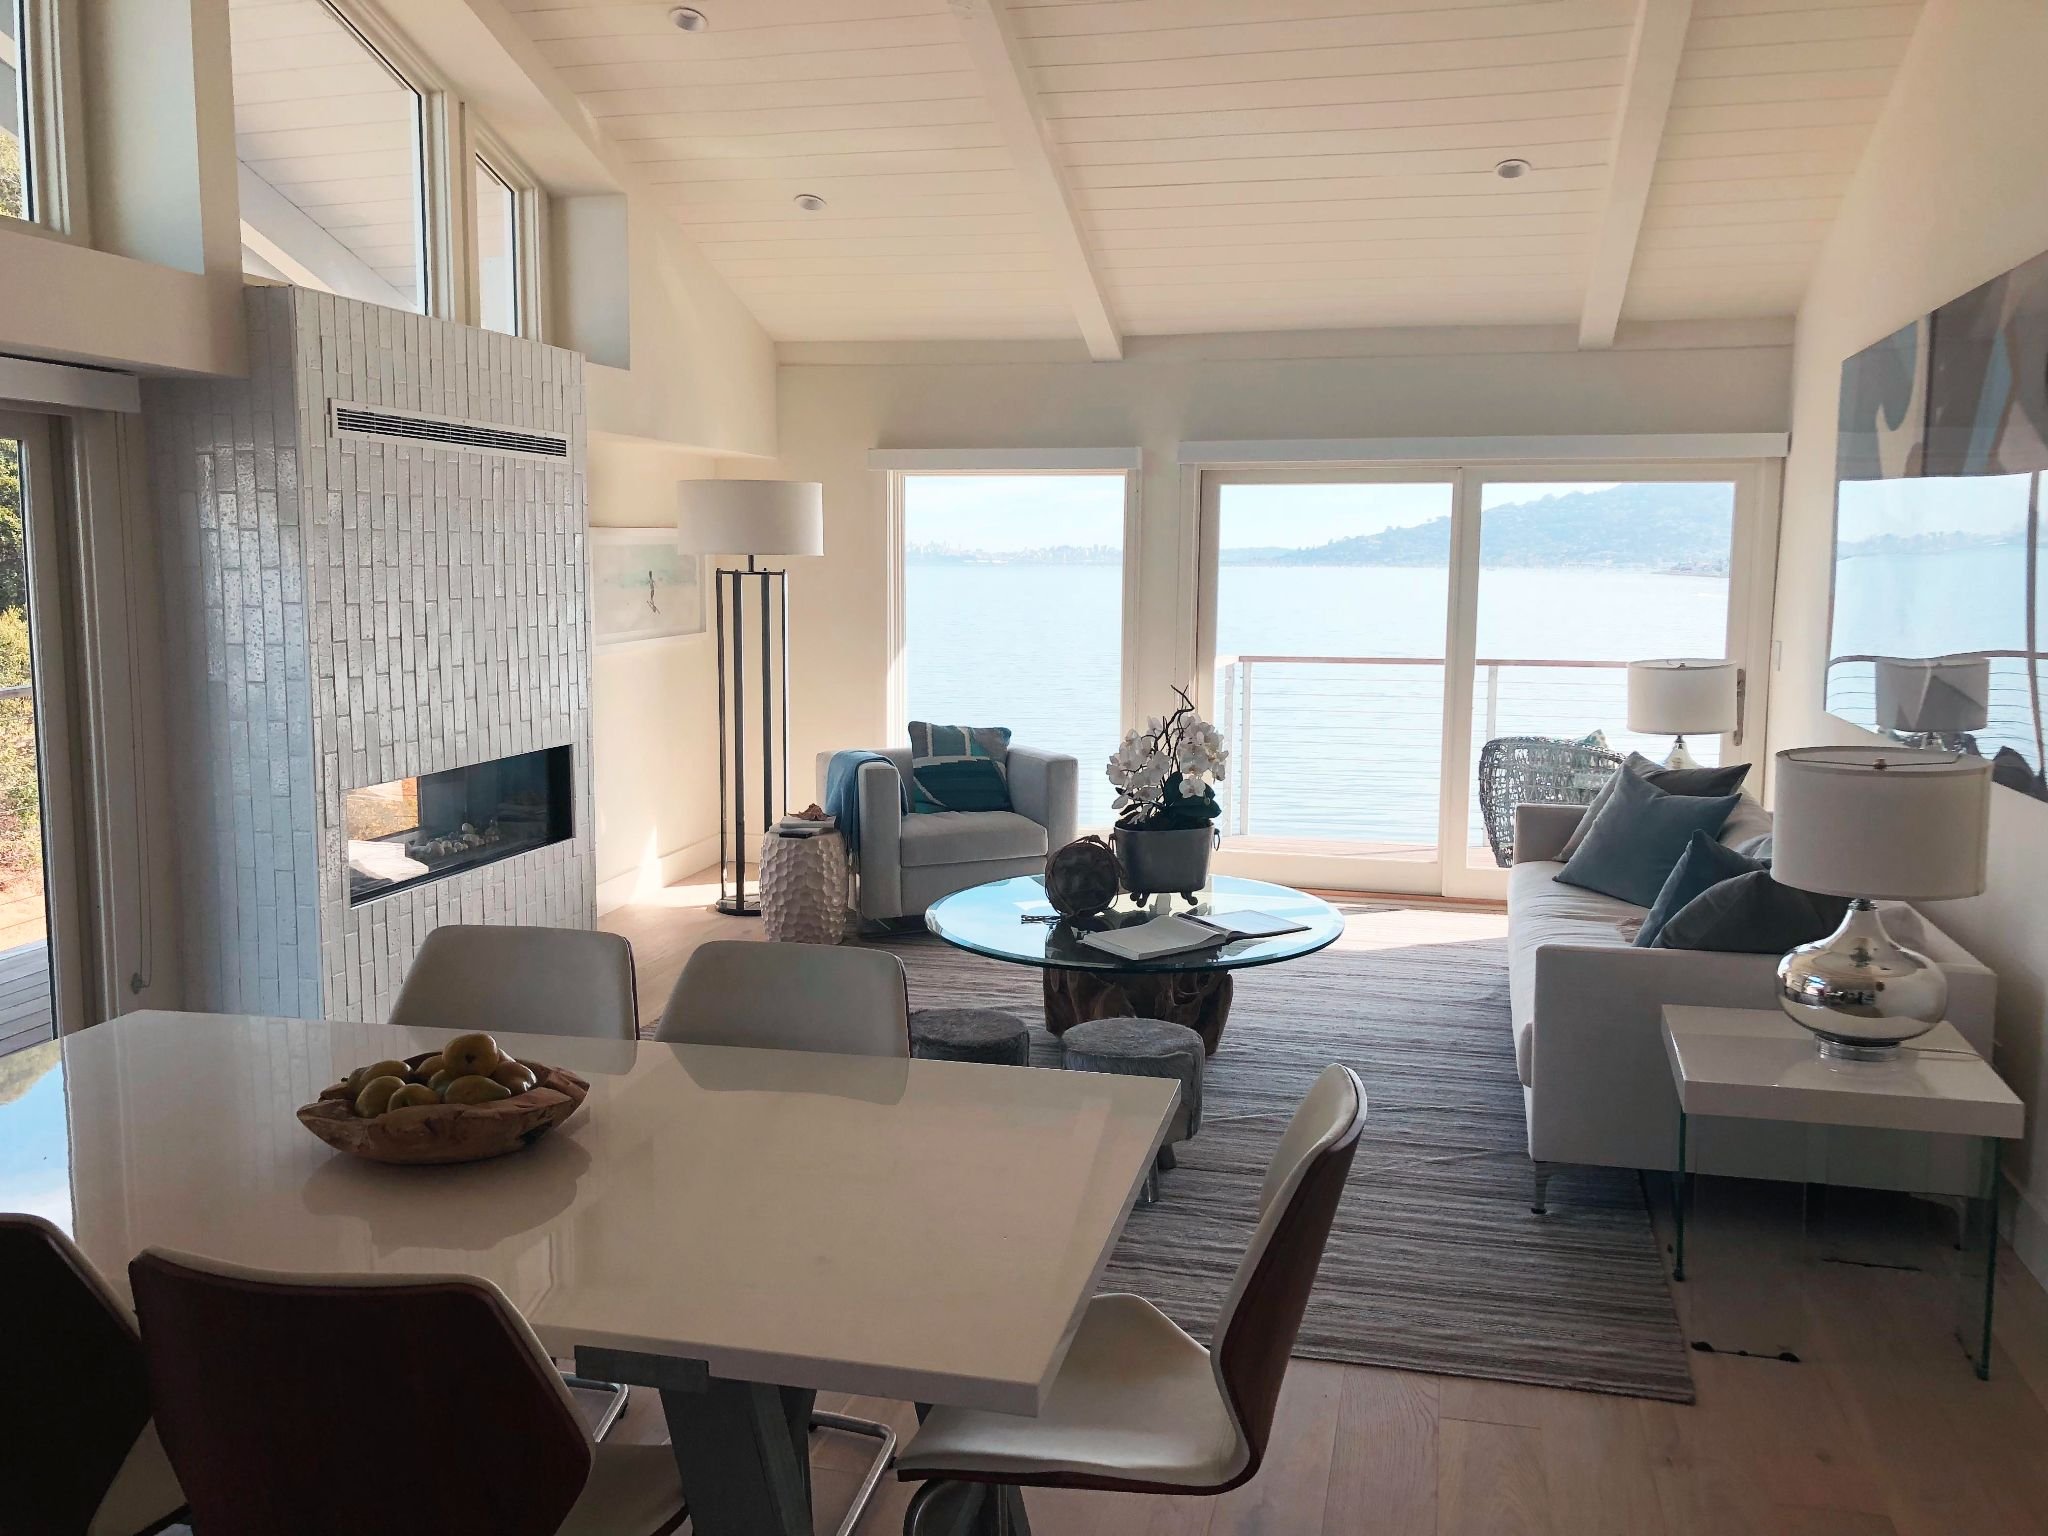 A space so immense,  one photo just couldn&rsquo;t fit it all 😍
-
-
-
-
-
-
#pinterestinspired #dreamhome #interiordesign #waterfront #waterfrontliving #tiburon #tiburonca #tiburonrents #apartment